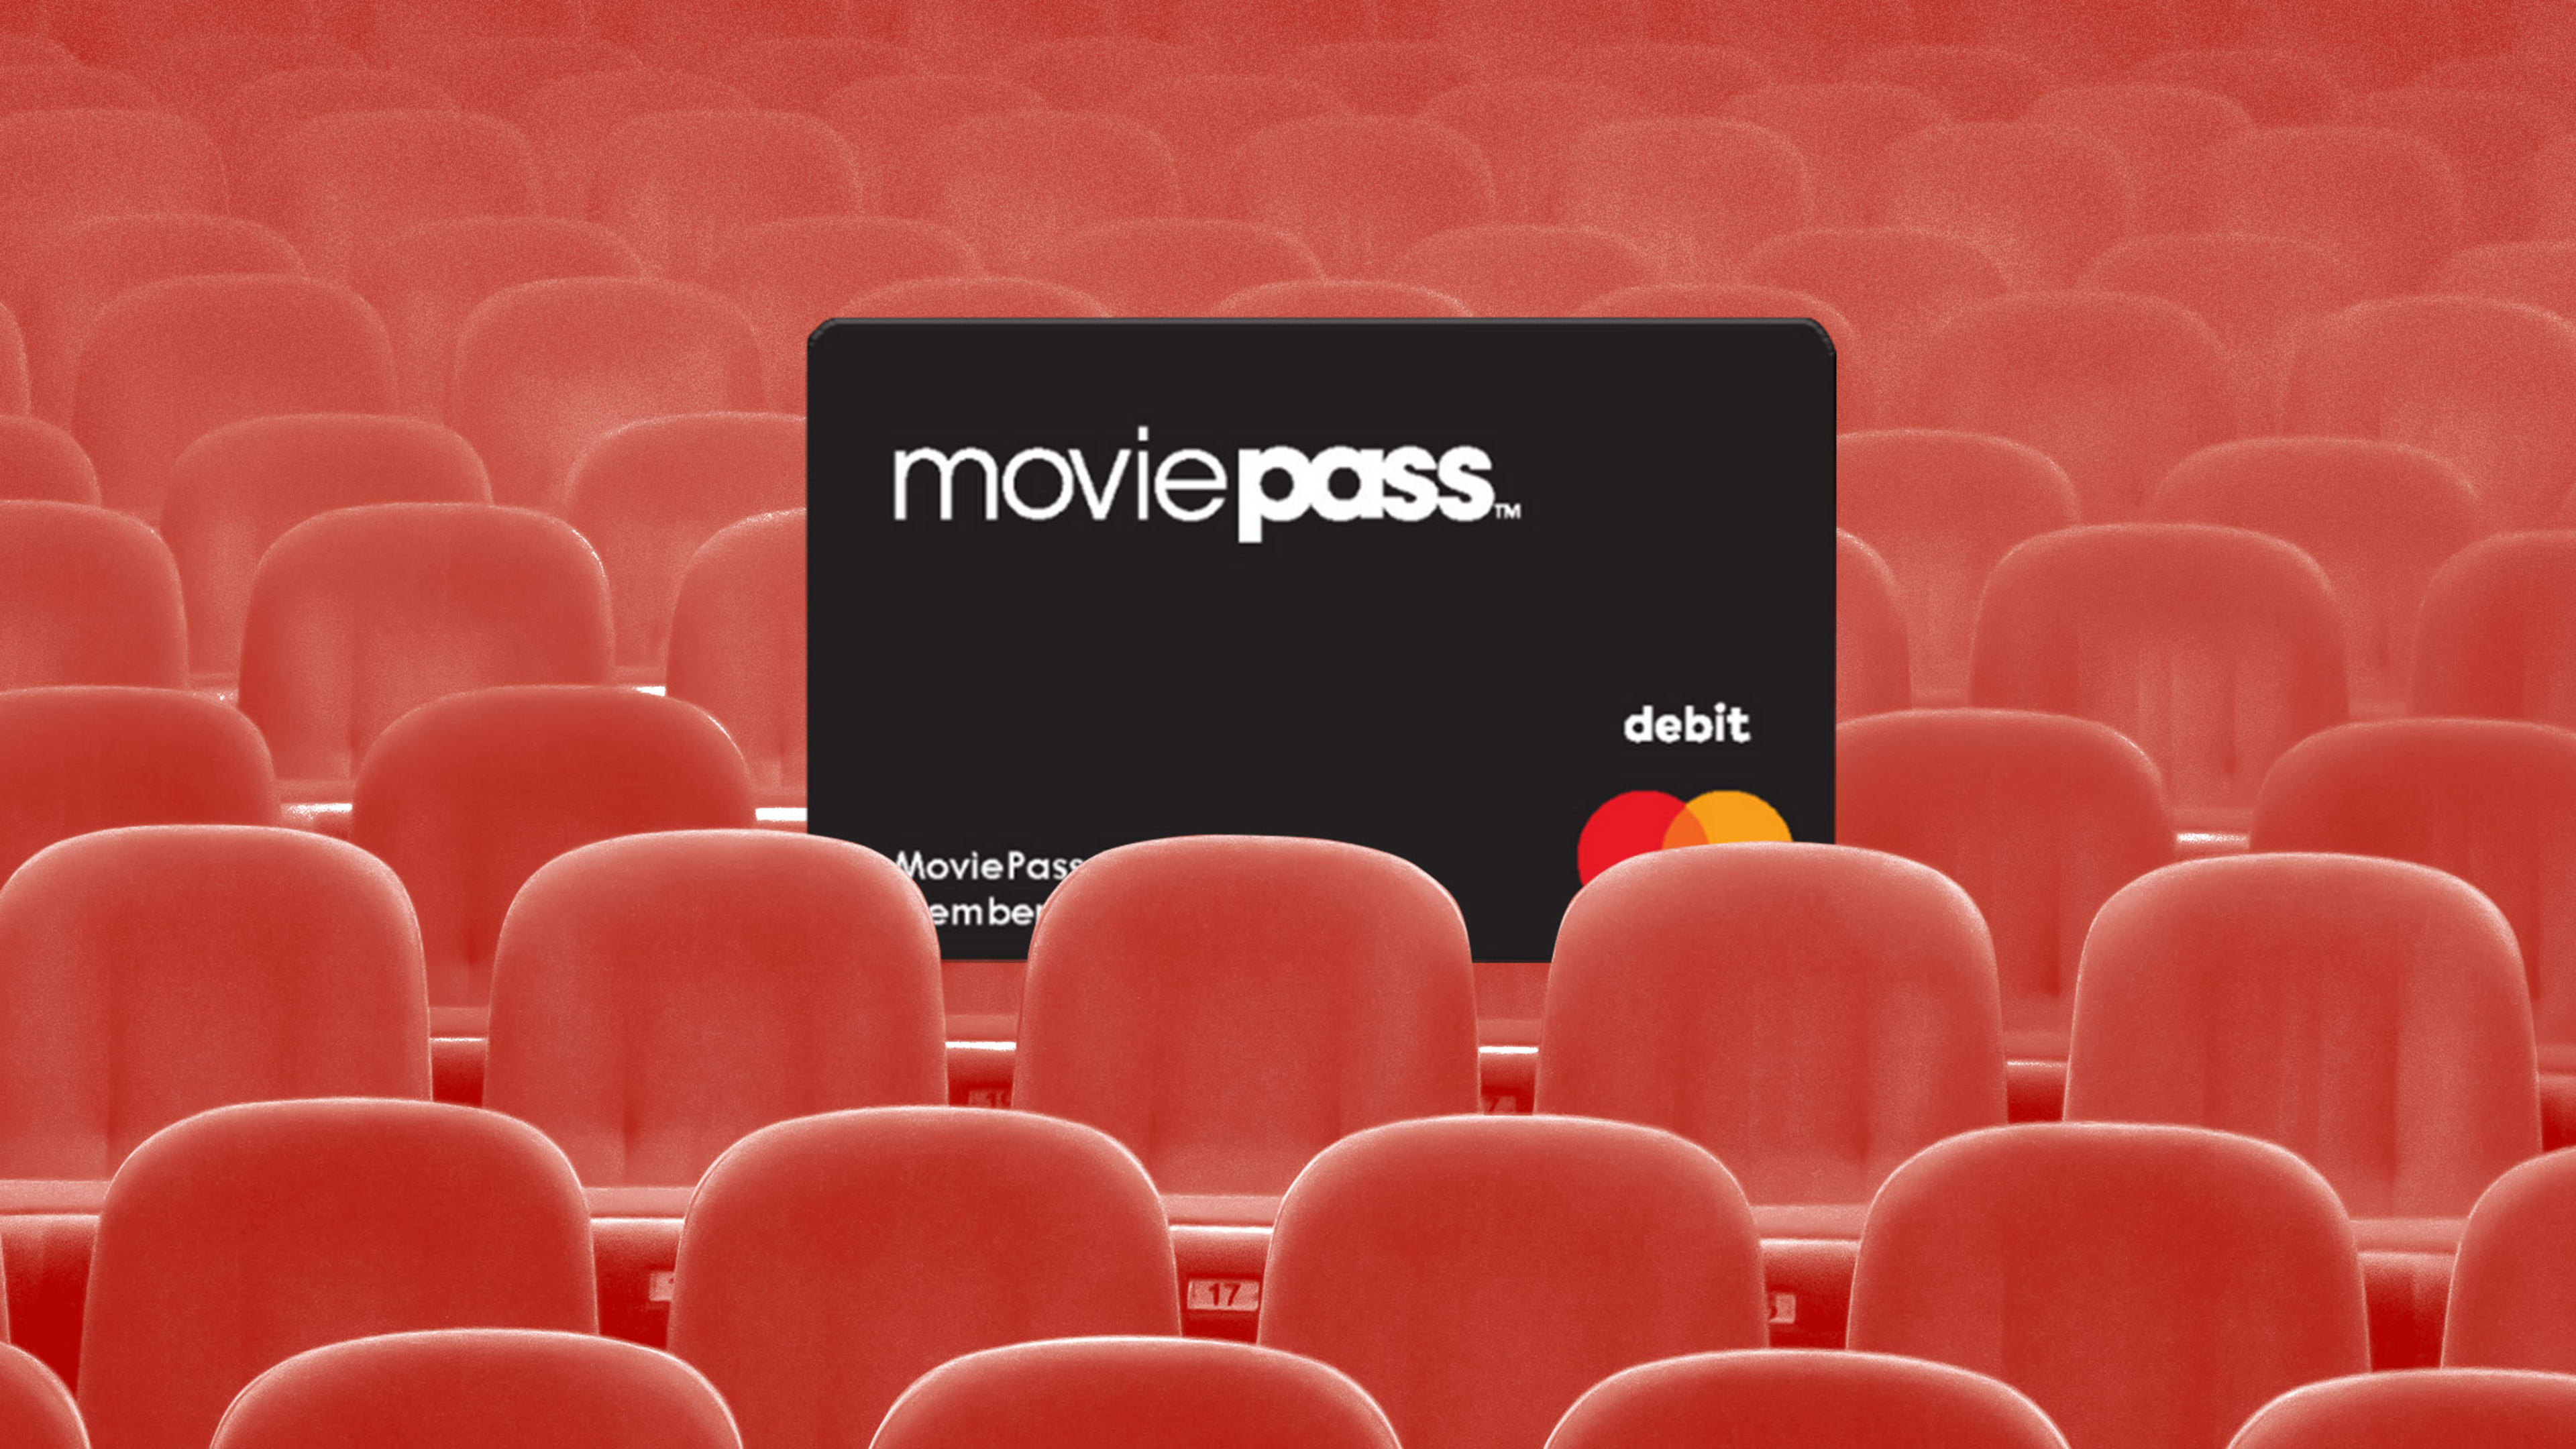 MoviePass reboot: Here’s what to know about the latest plans, options, and credit system